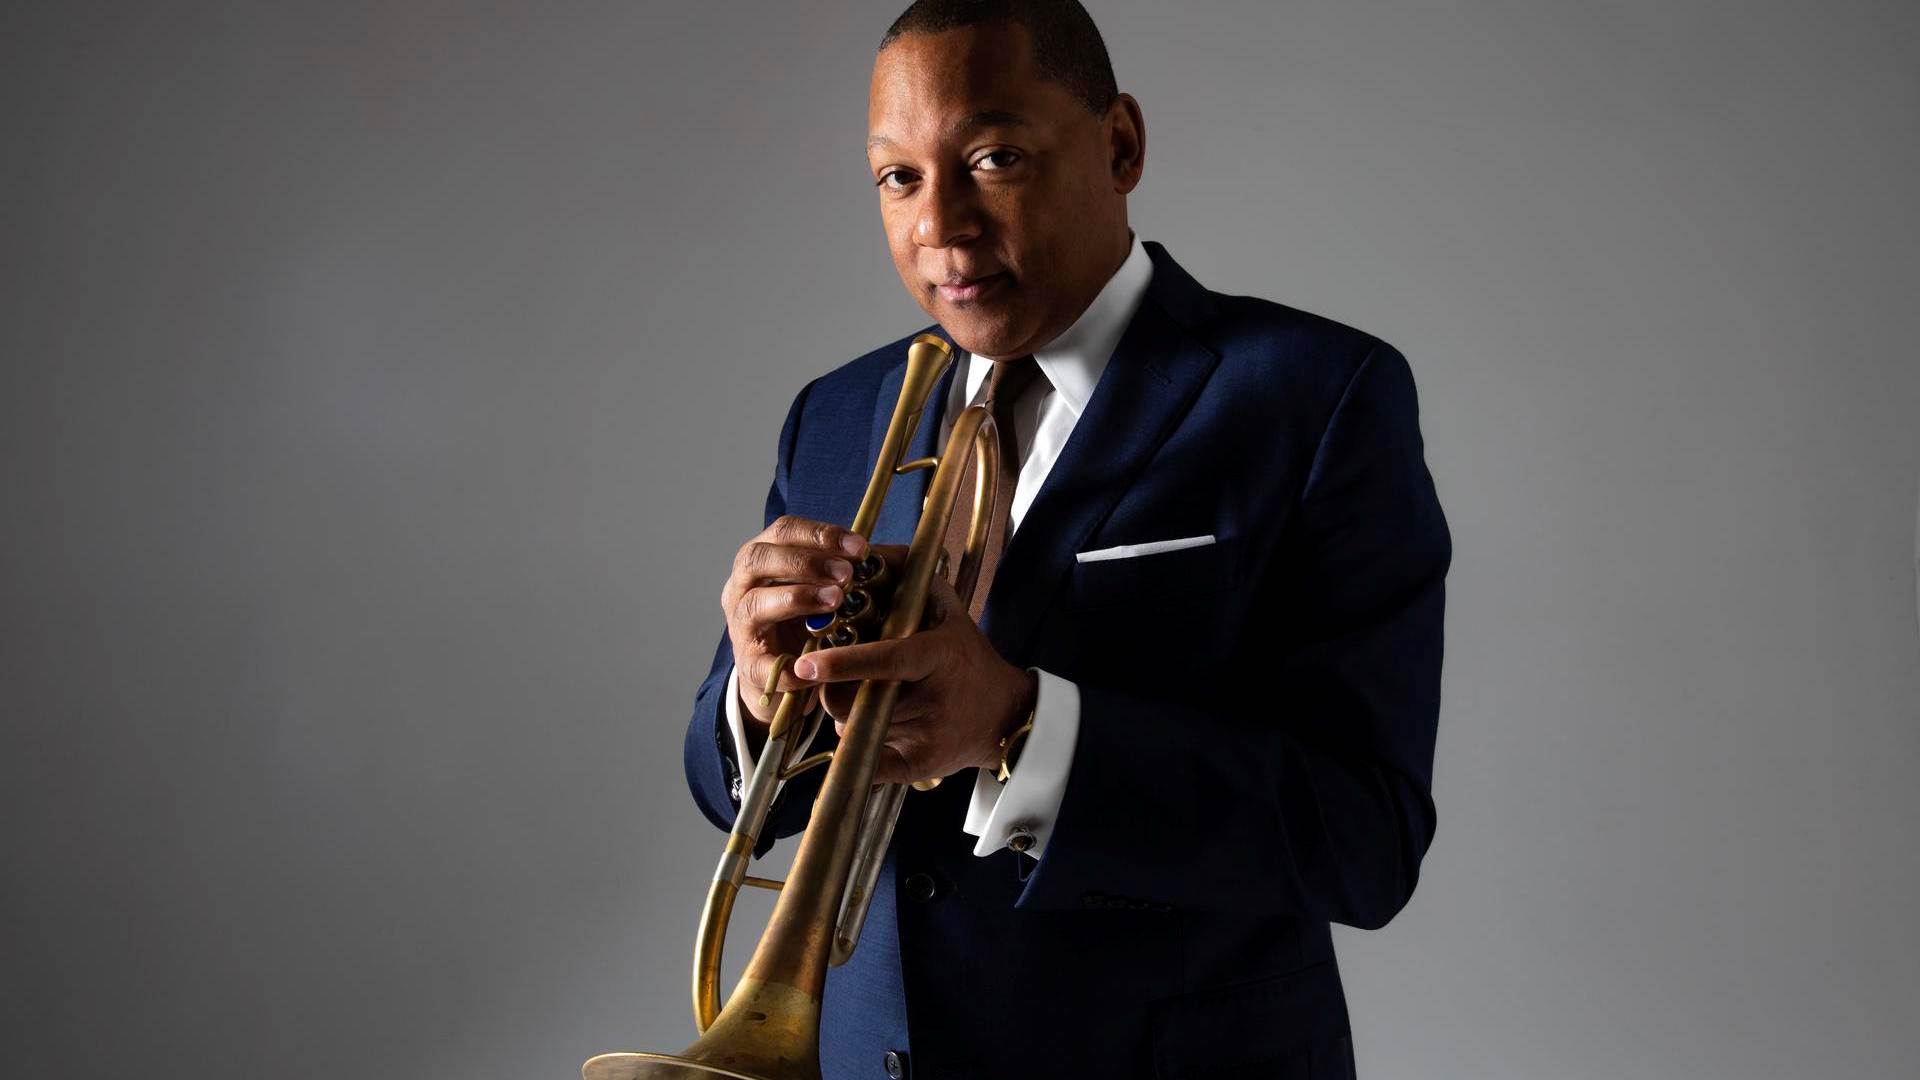 Wynton Marsalis, a middle aged man with dark complexion and brown eyes in a blue suit and brown tie holding a trumpet. The background is grey.